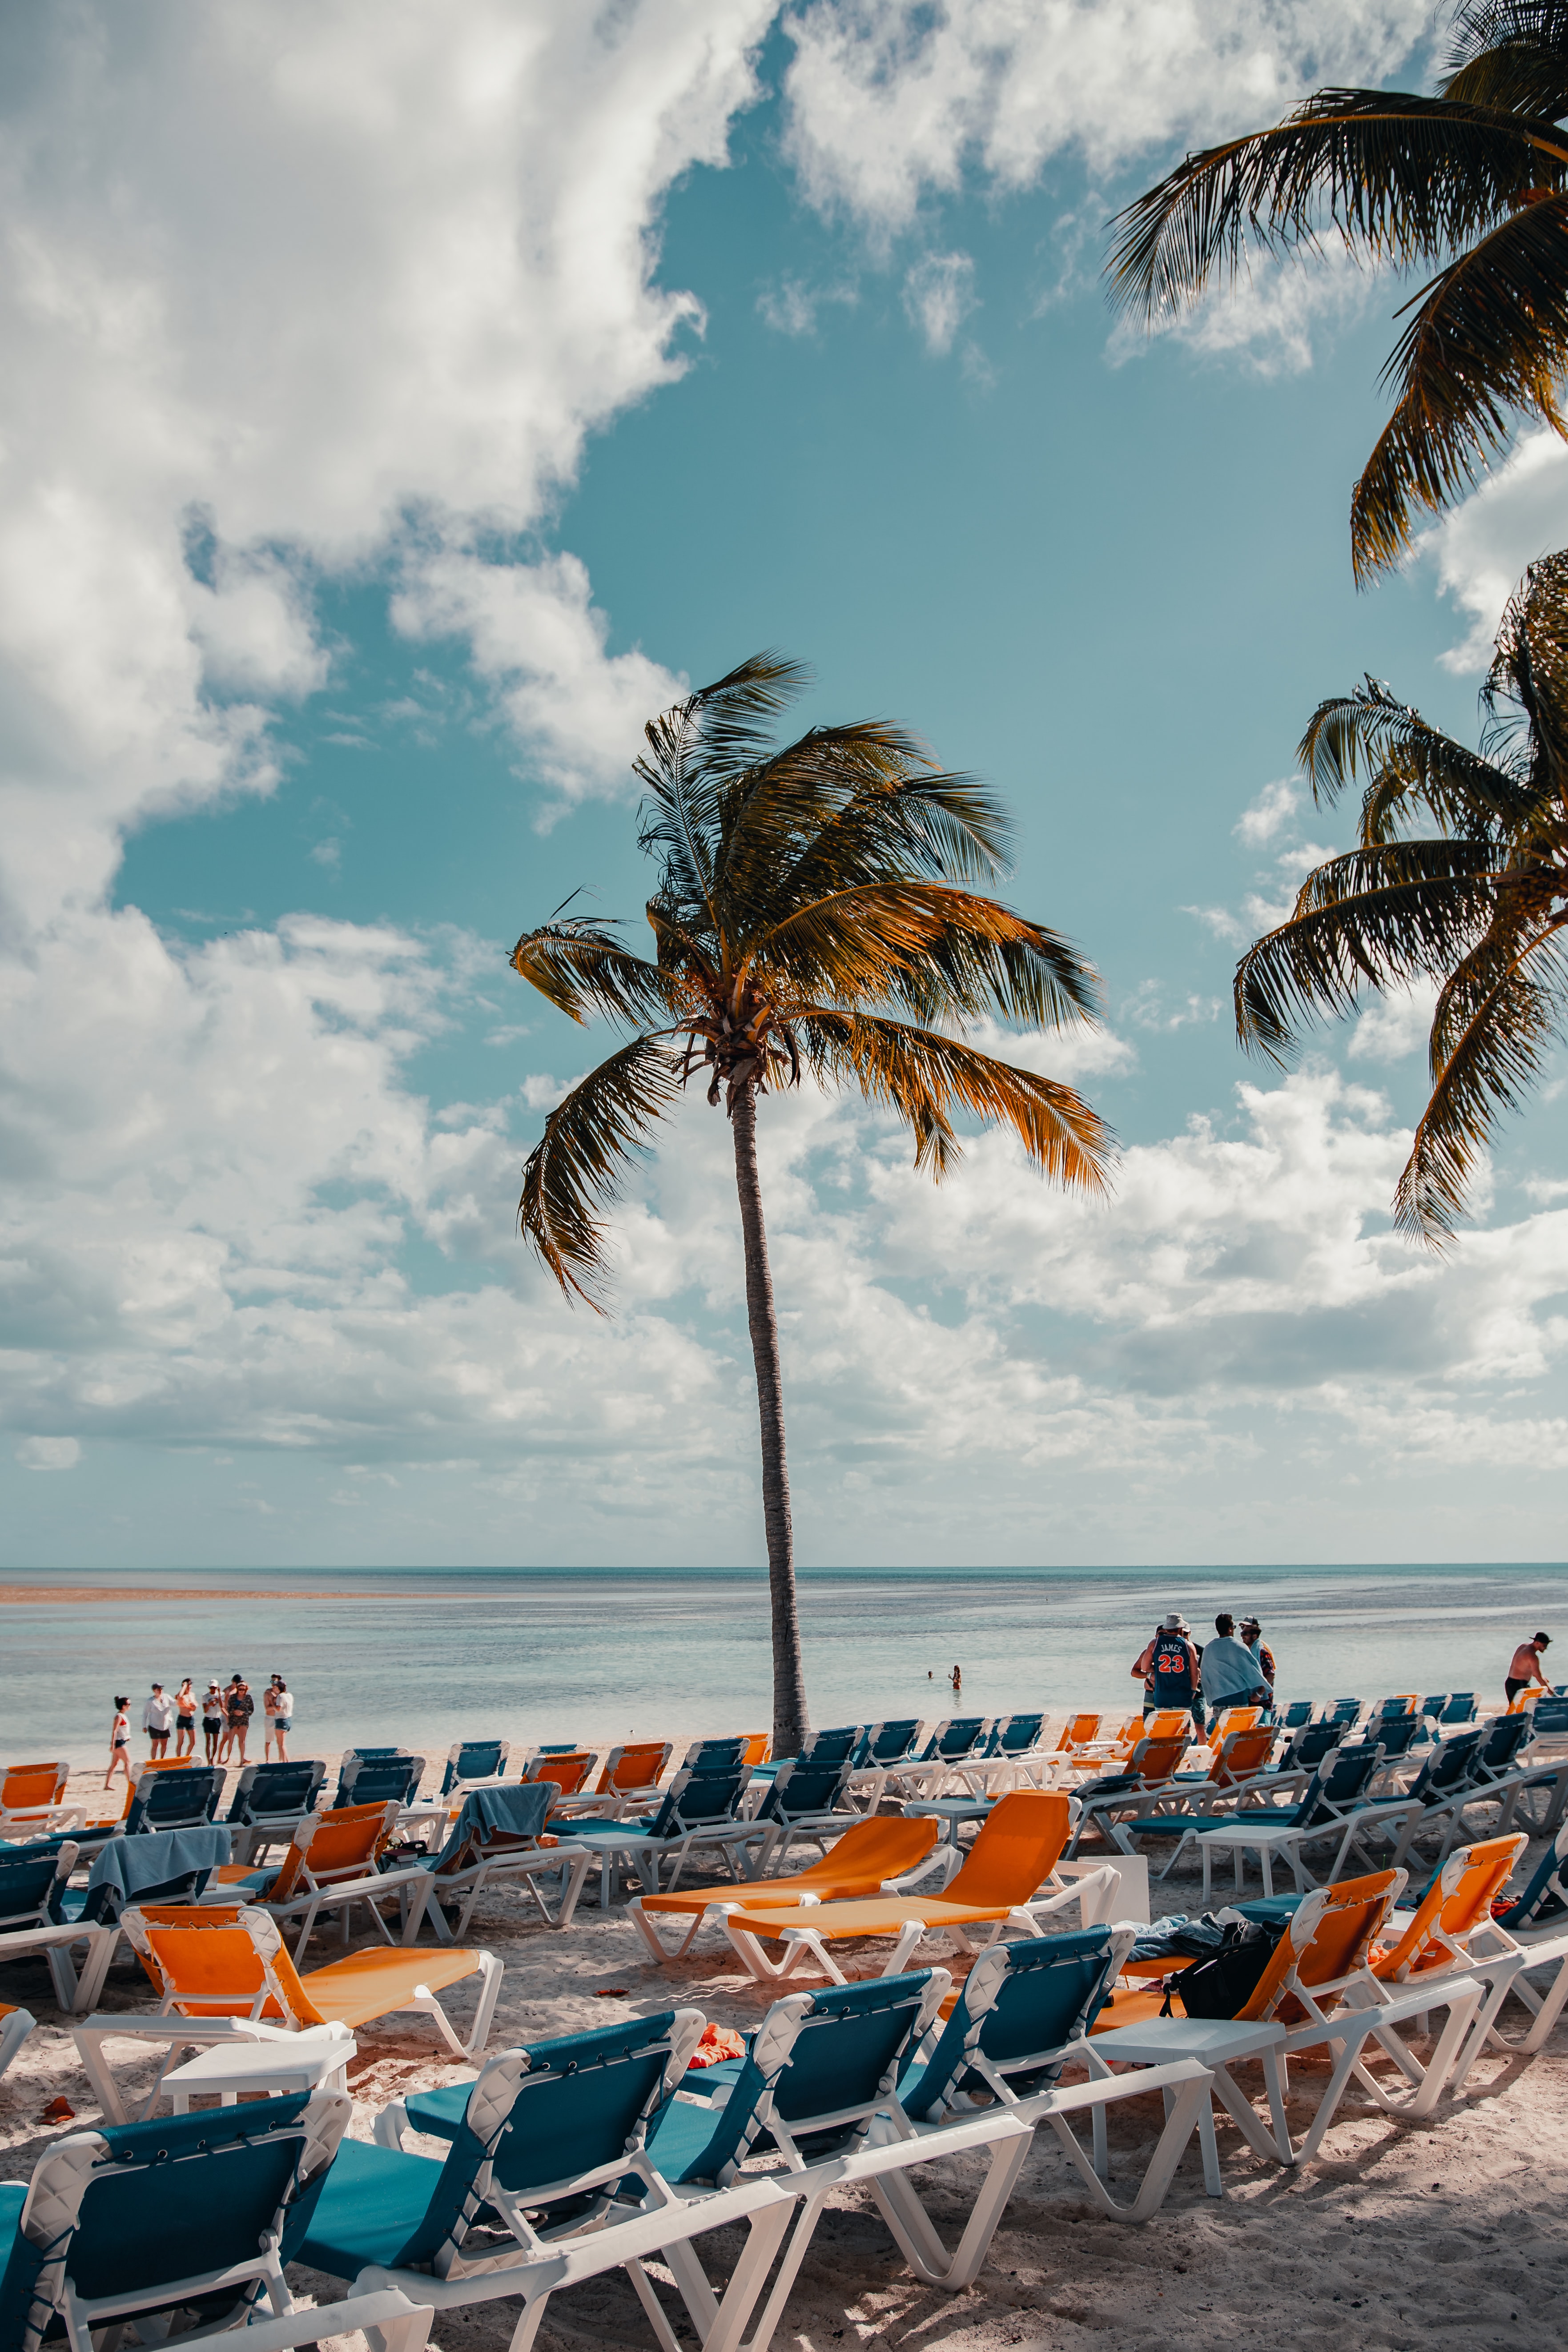 Is Coco Cay Pass worth it?